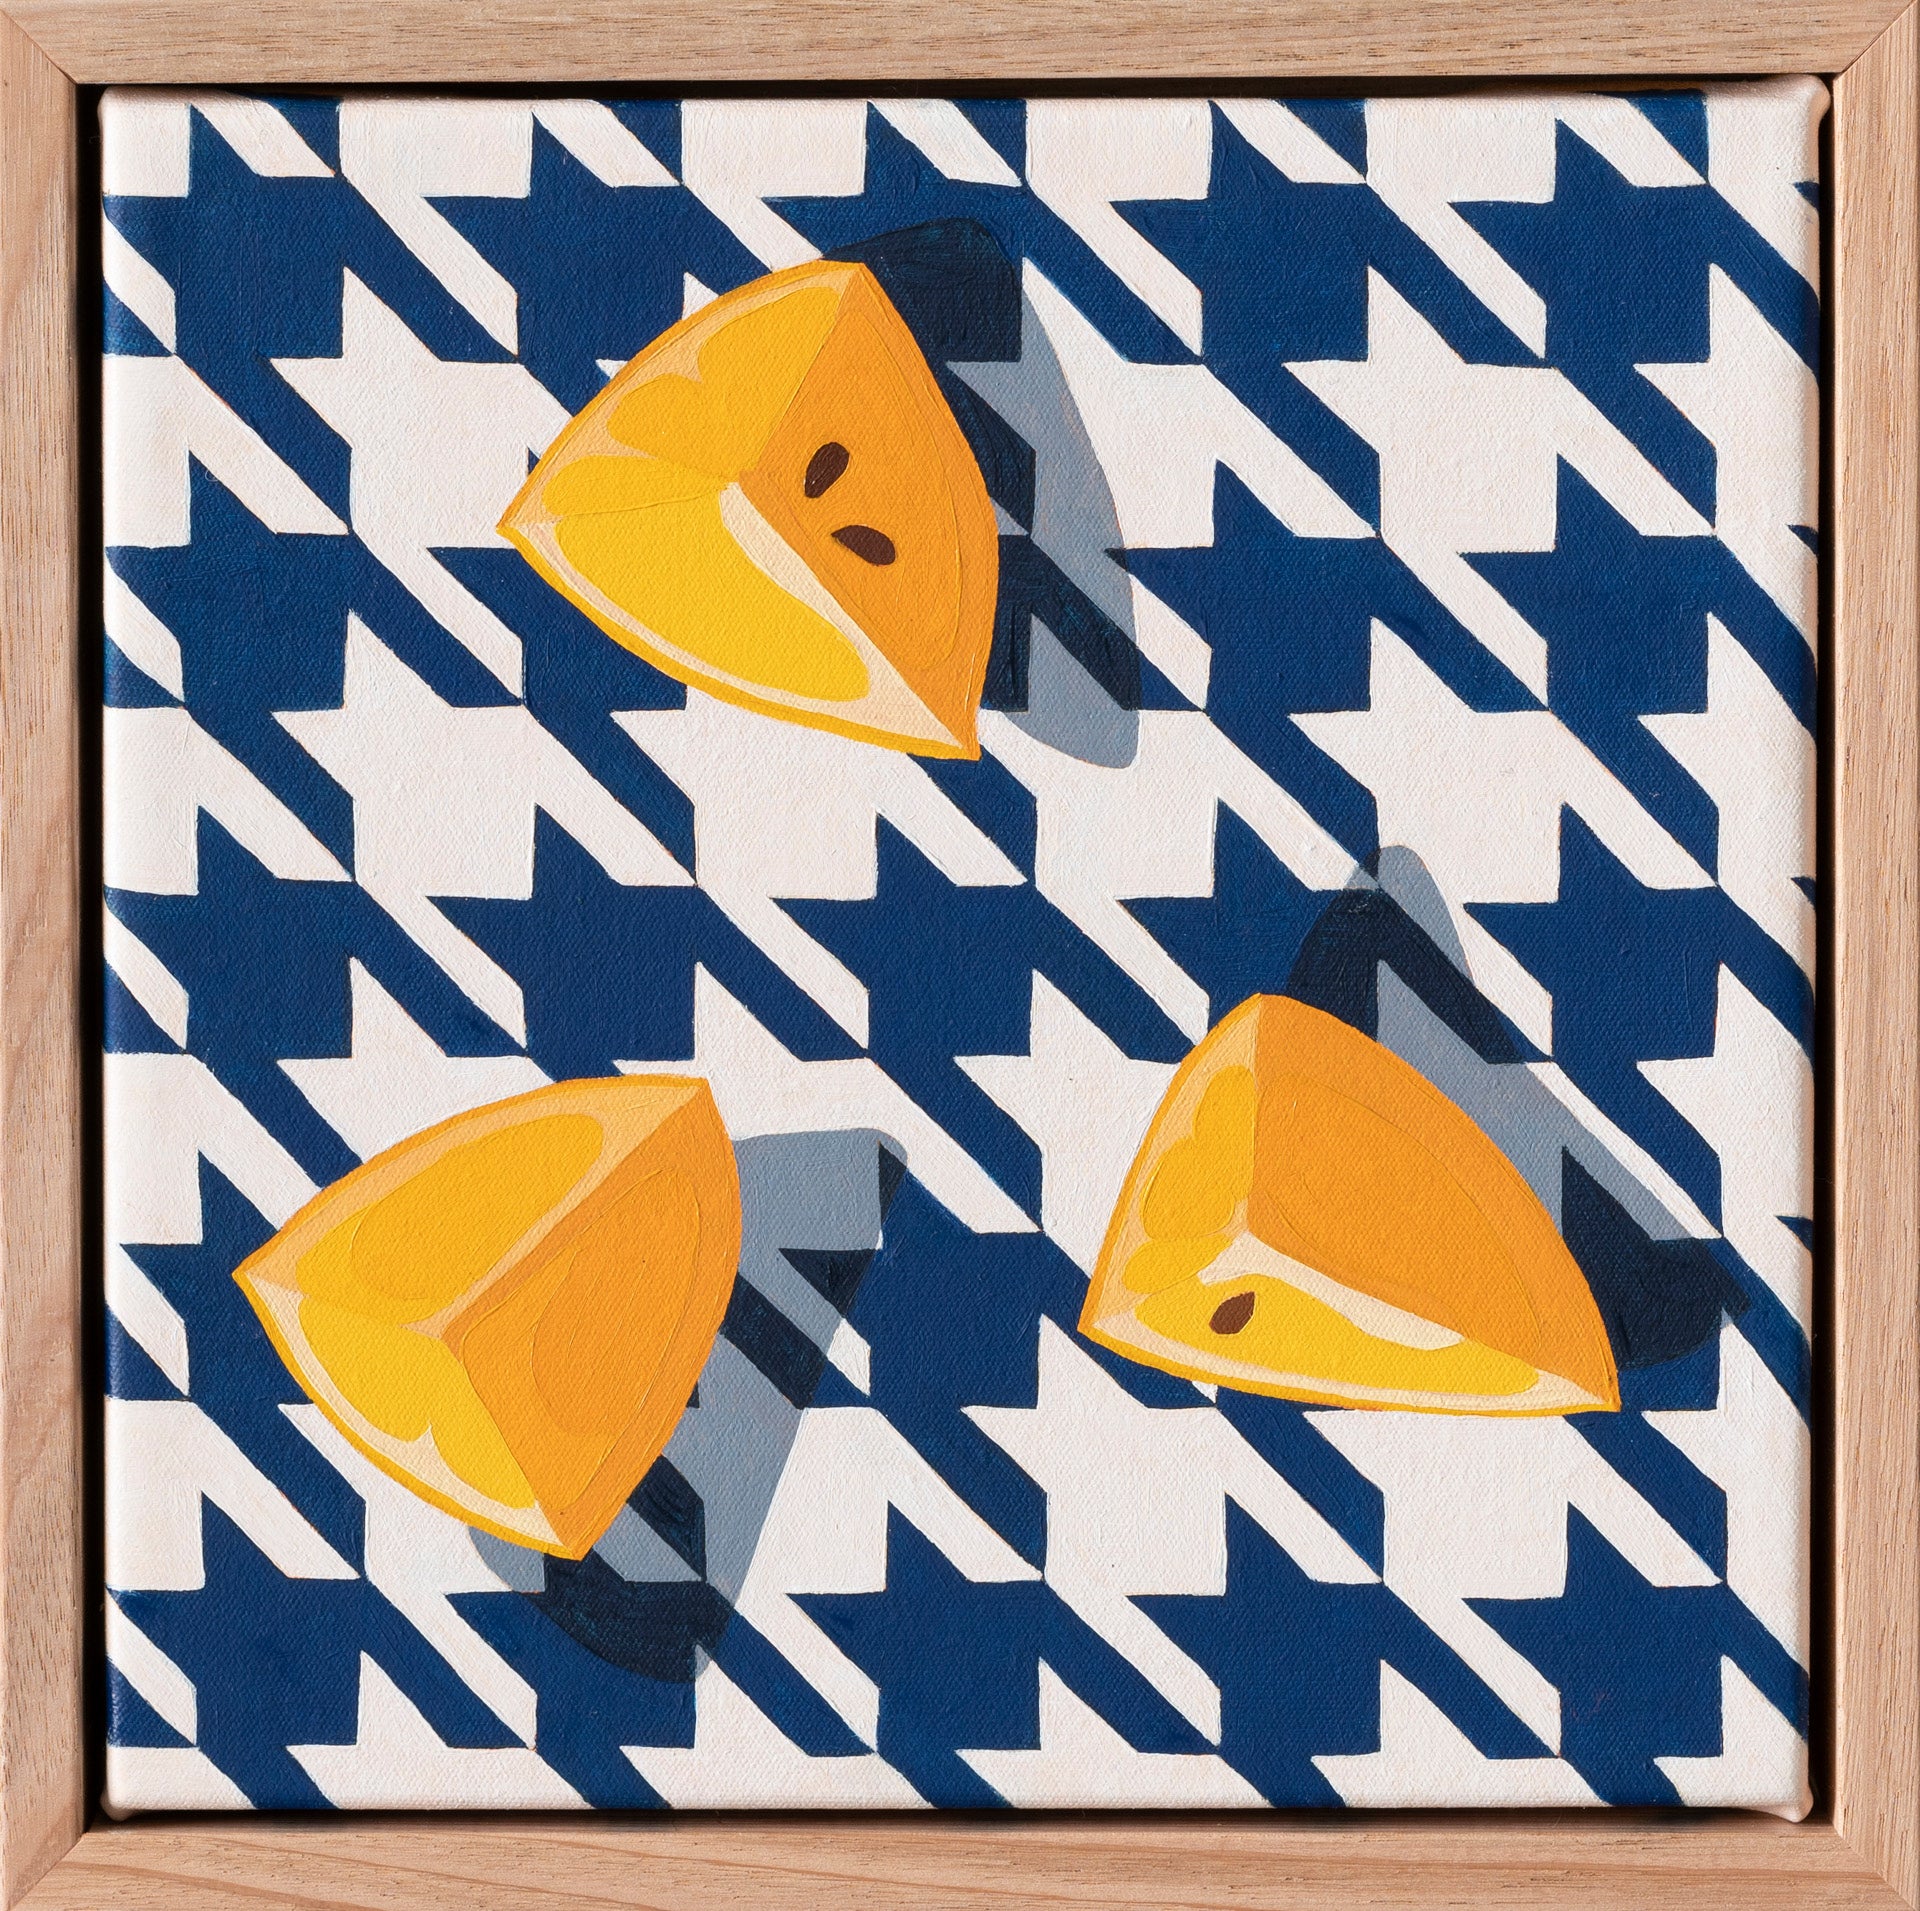 an original oil painting of three wedges of yellow lemons on a navy blue and white houndstooth background with blue-grey shadows framed in American Ash timber shadow box